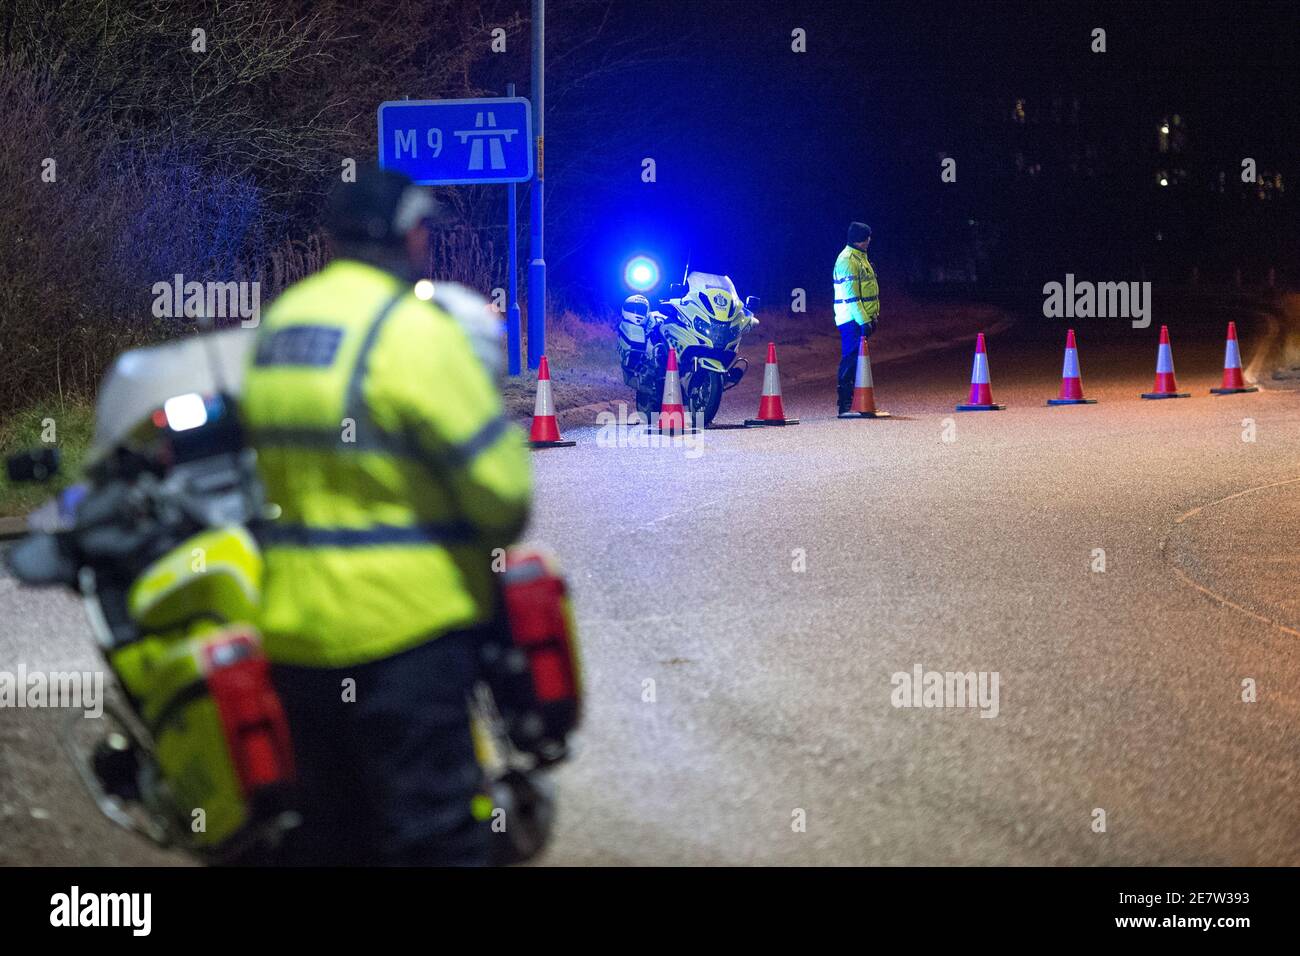 Stirling, Scotland, UK. 30th Jan, 2021. Pictured: The M9 Motorway has been locked down between junctions 9 and 11 amid an ongoing police incident. No other facts have come to light presently. Credit: Colin Fisher/Alamy Live News Stock Photo